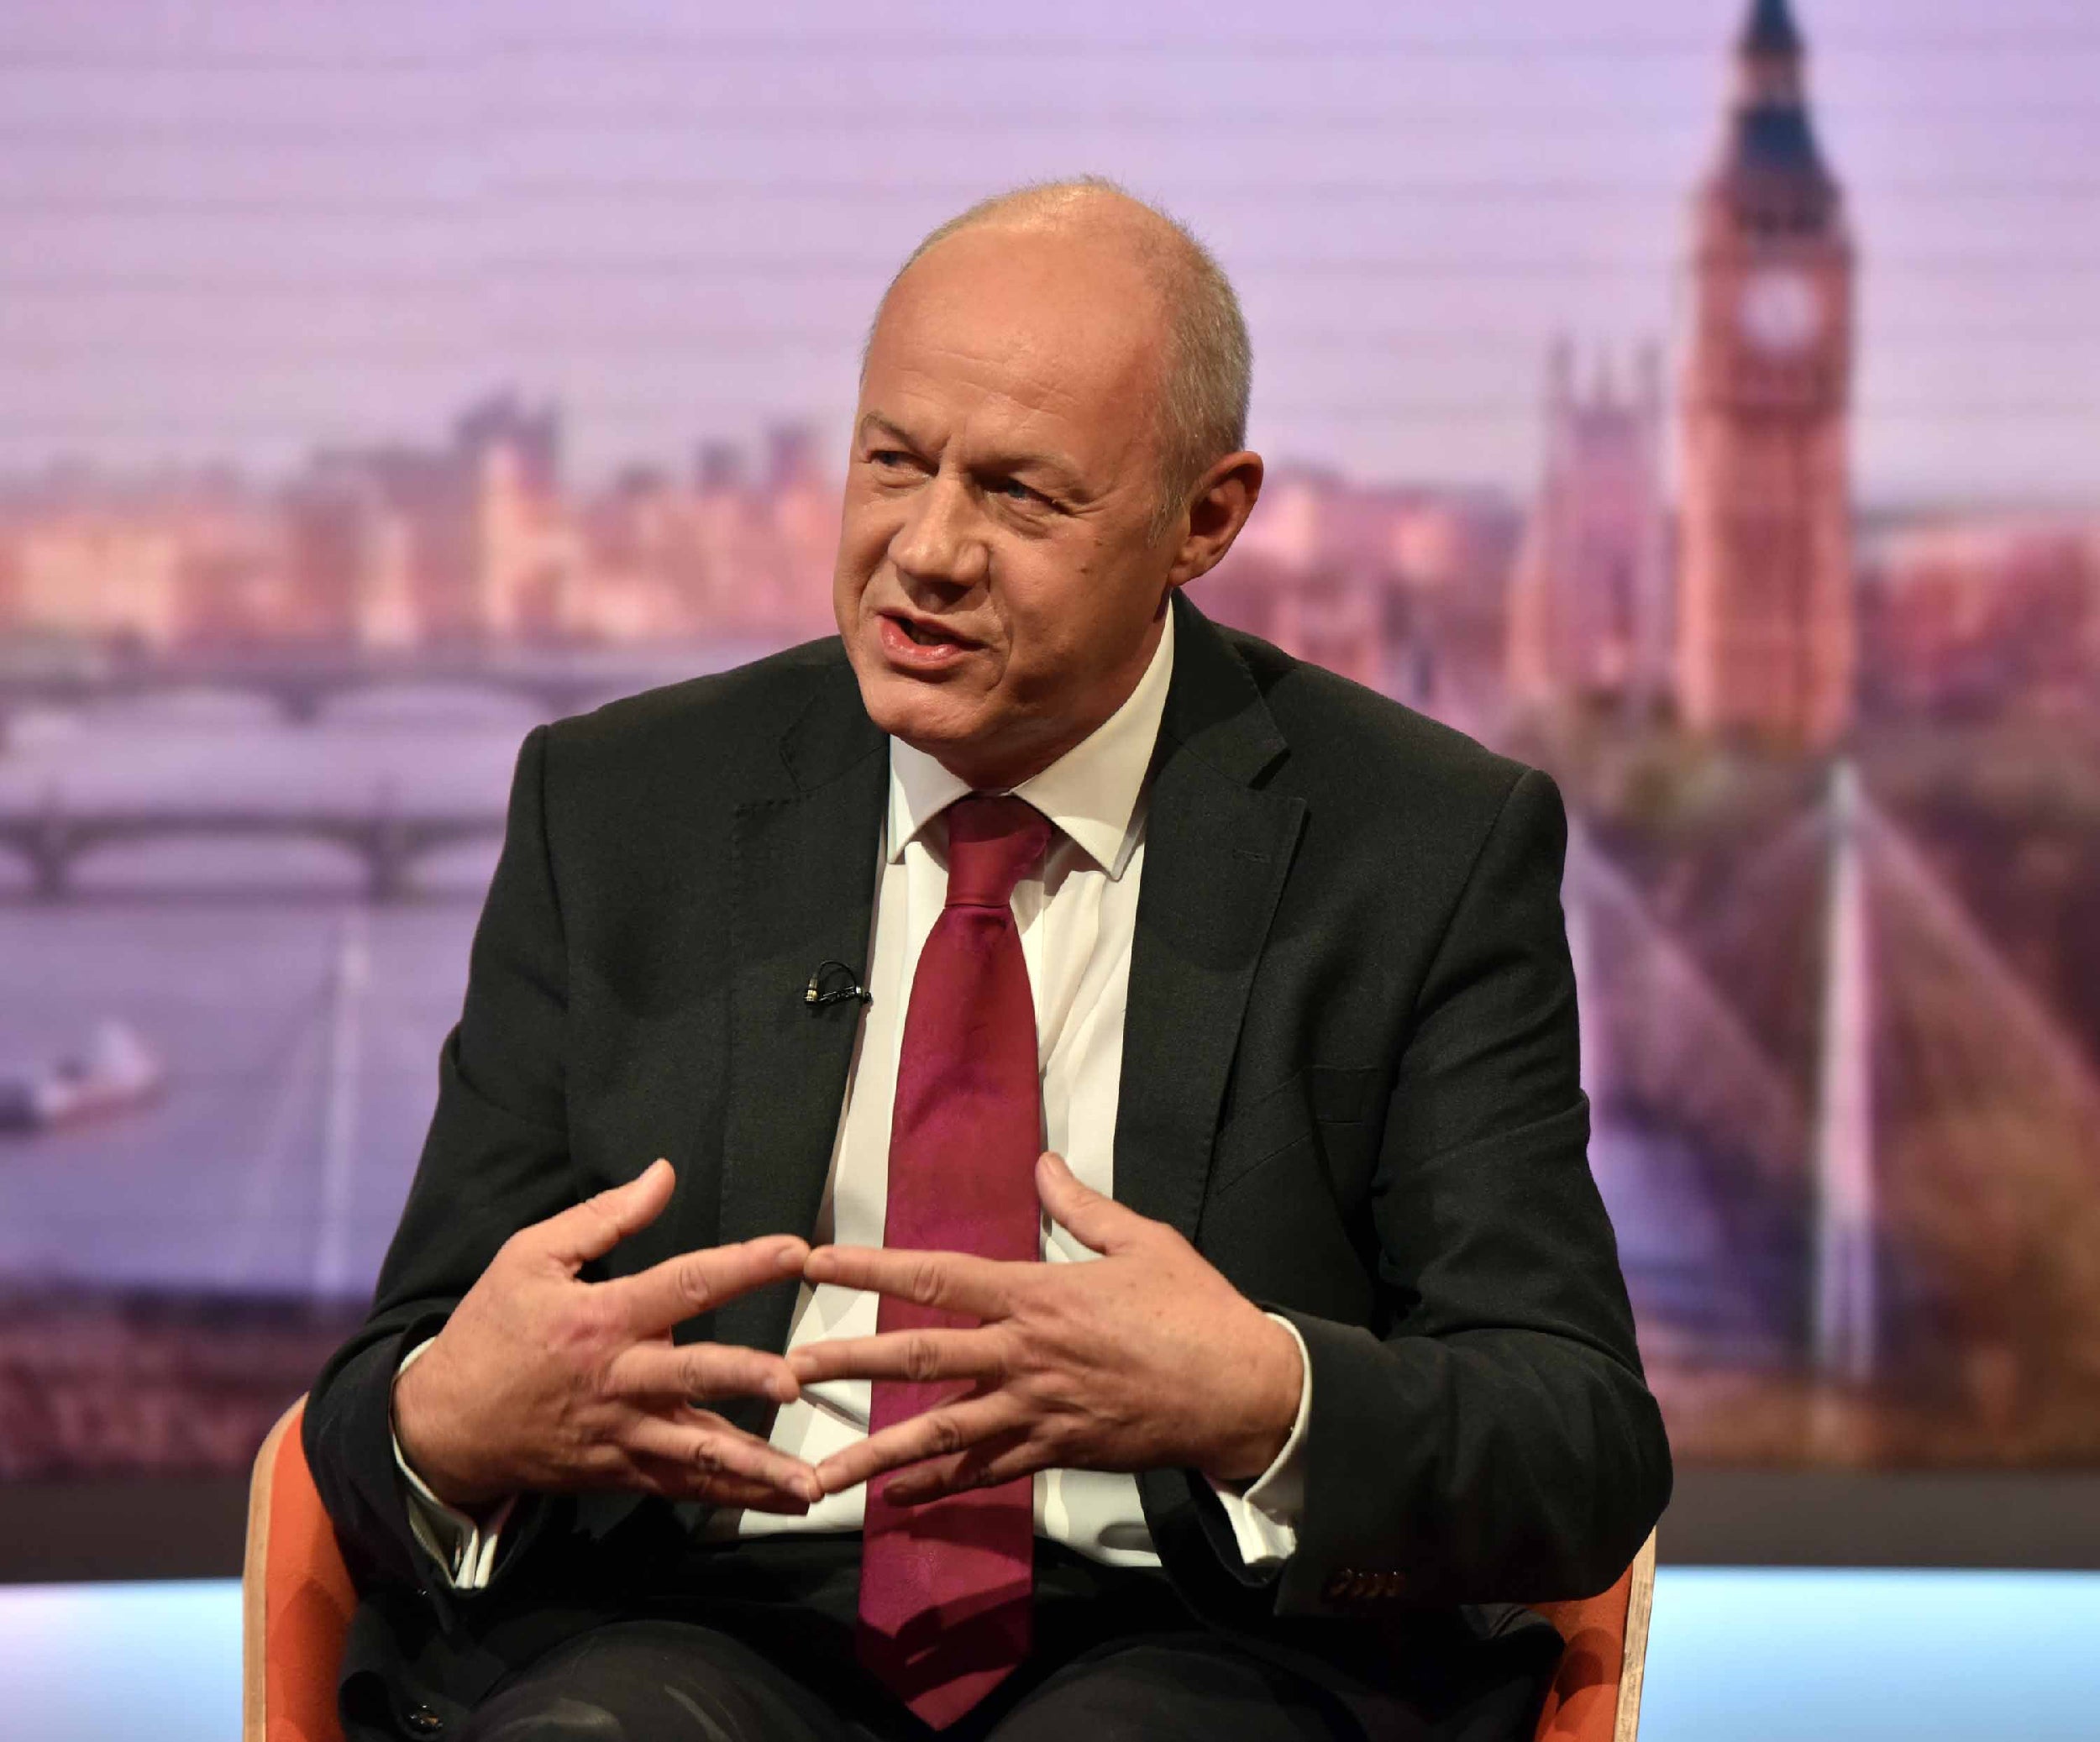 The woman’s MP has vowed to write to Work and Pensions Secretary Damian Green (above) to get a ‘full apology to my constituent’